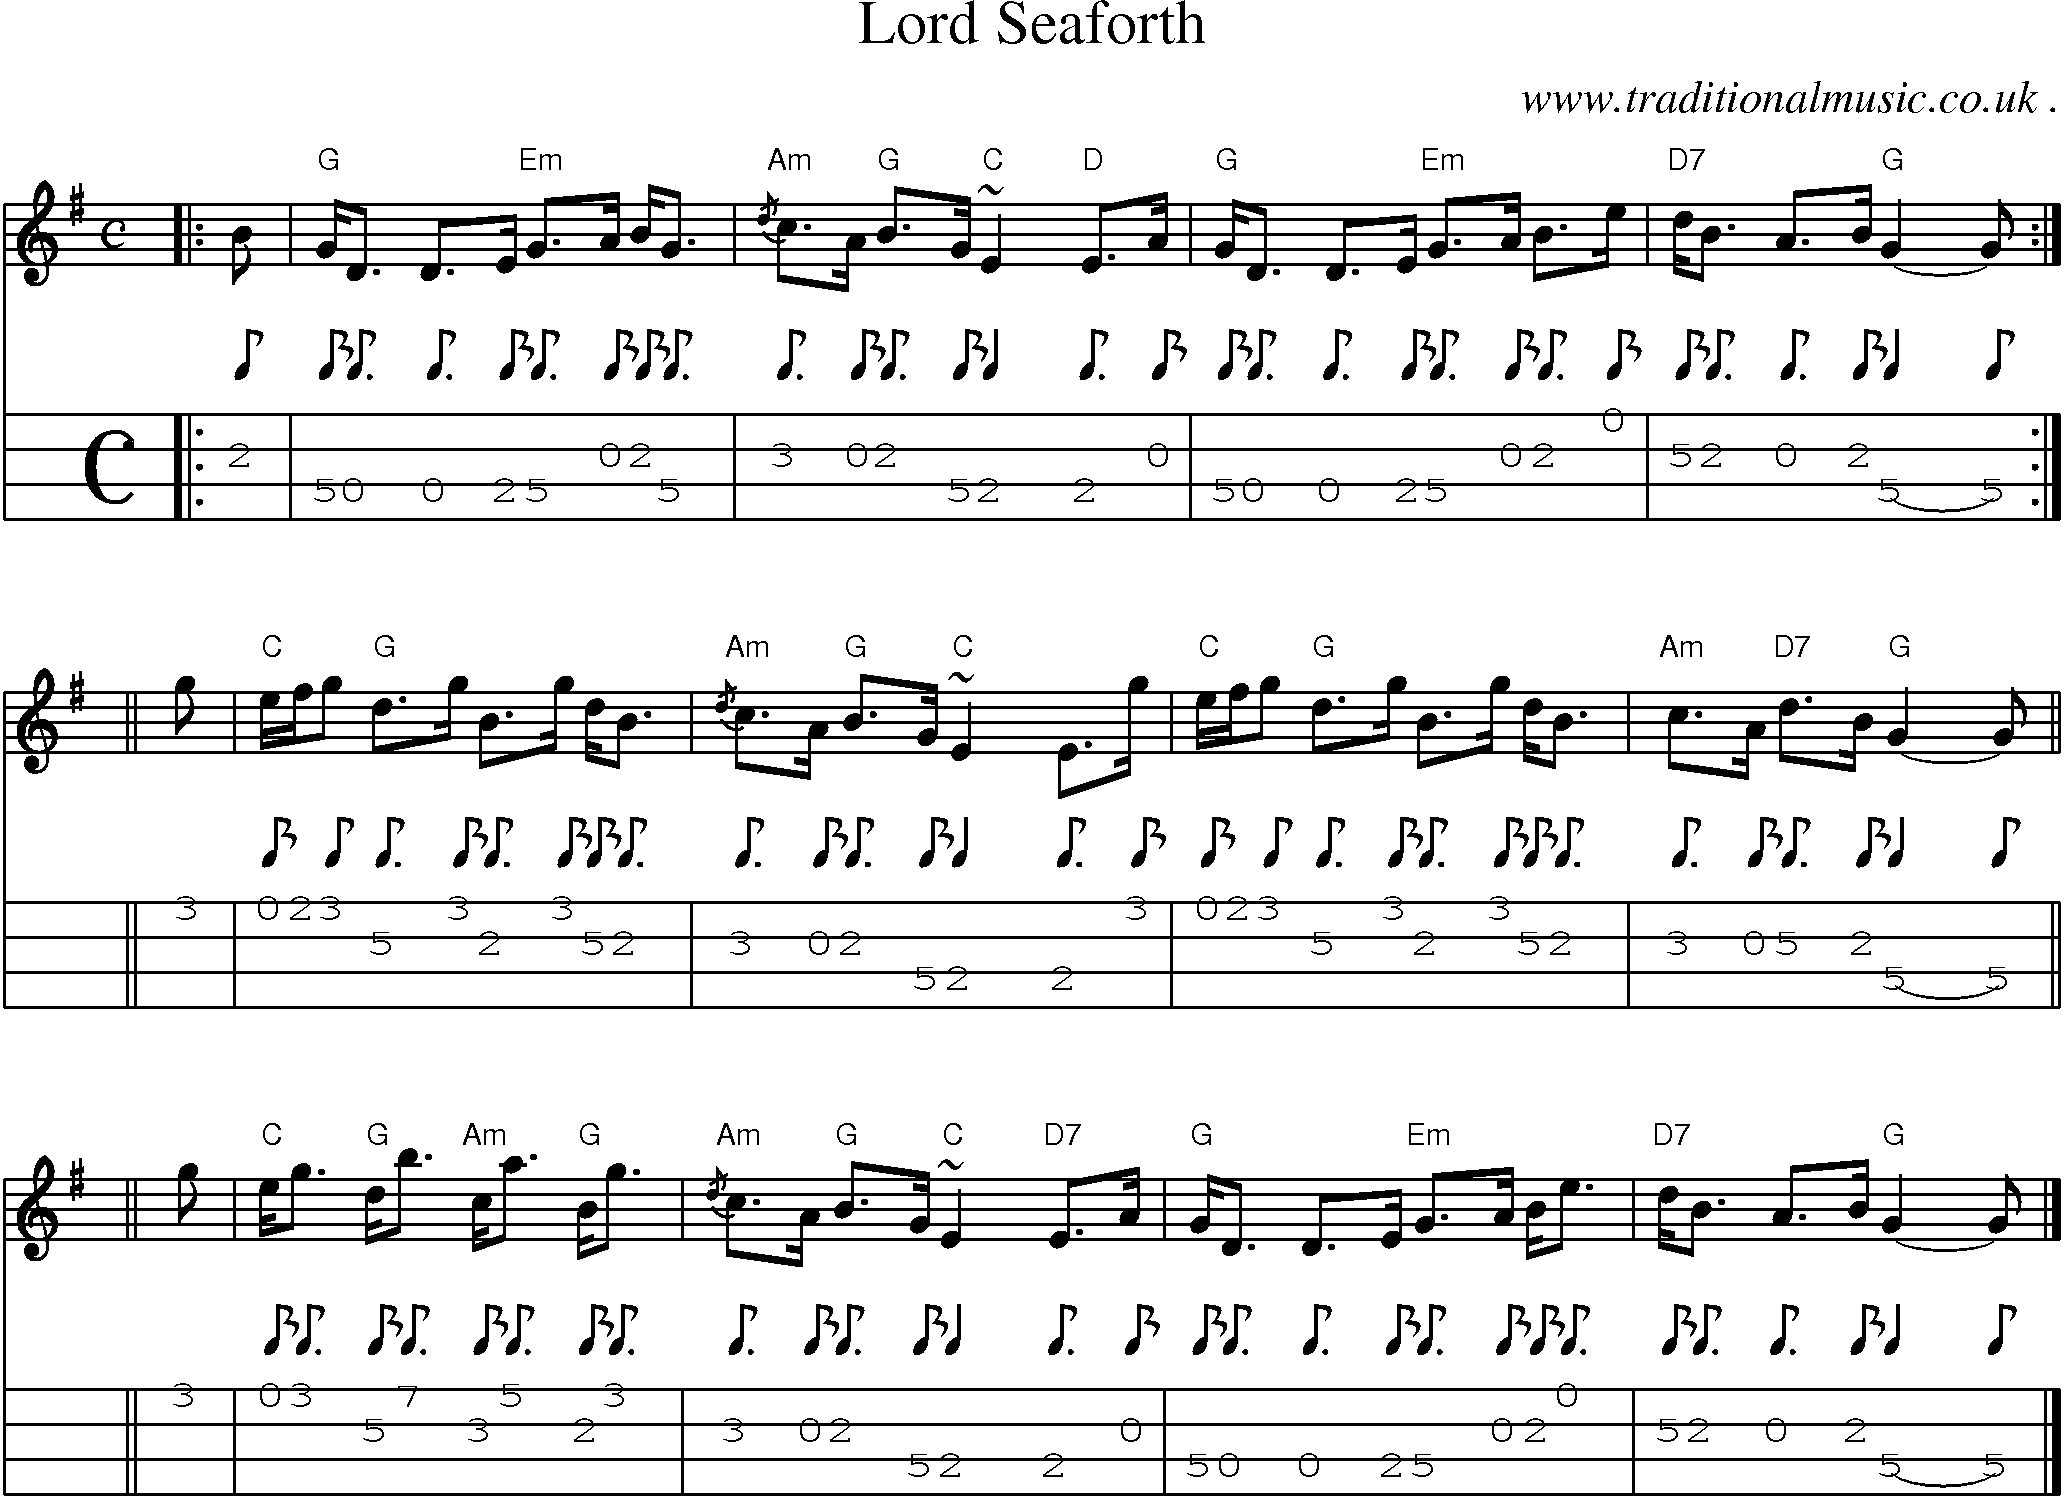 Sheet-music  score, Chords and Mandolin Tabs for Lord Seaforth